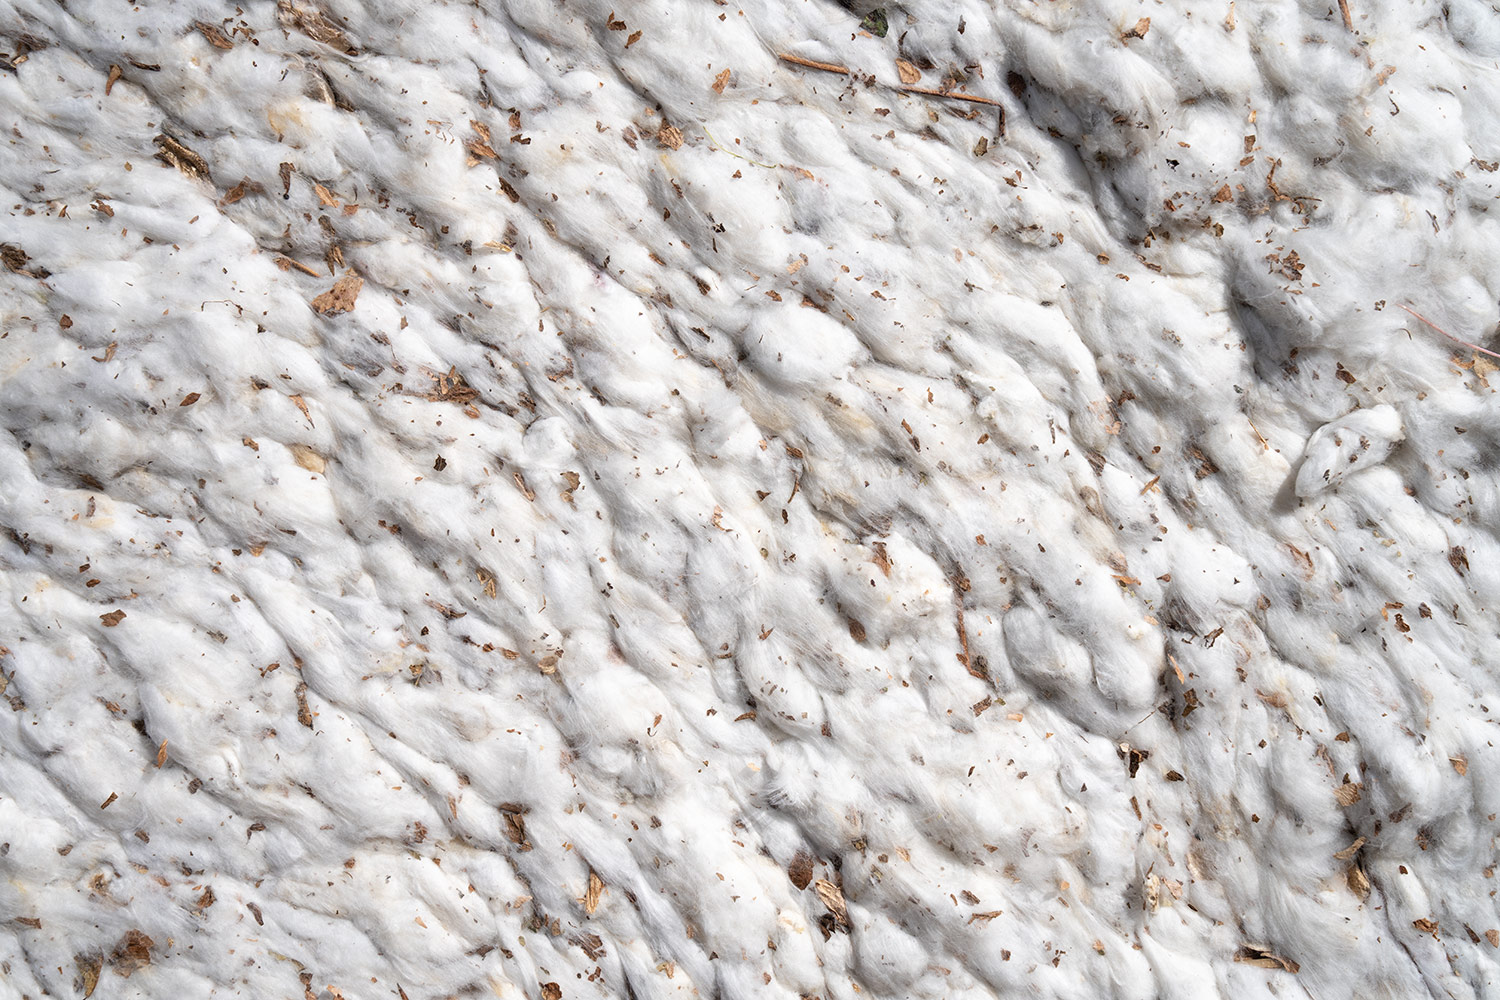 New GOTS Rules in Place Regarding Cotton Fibres and Ginning